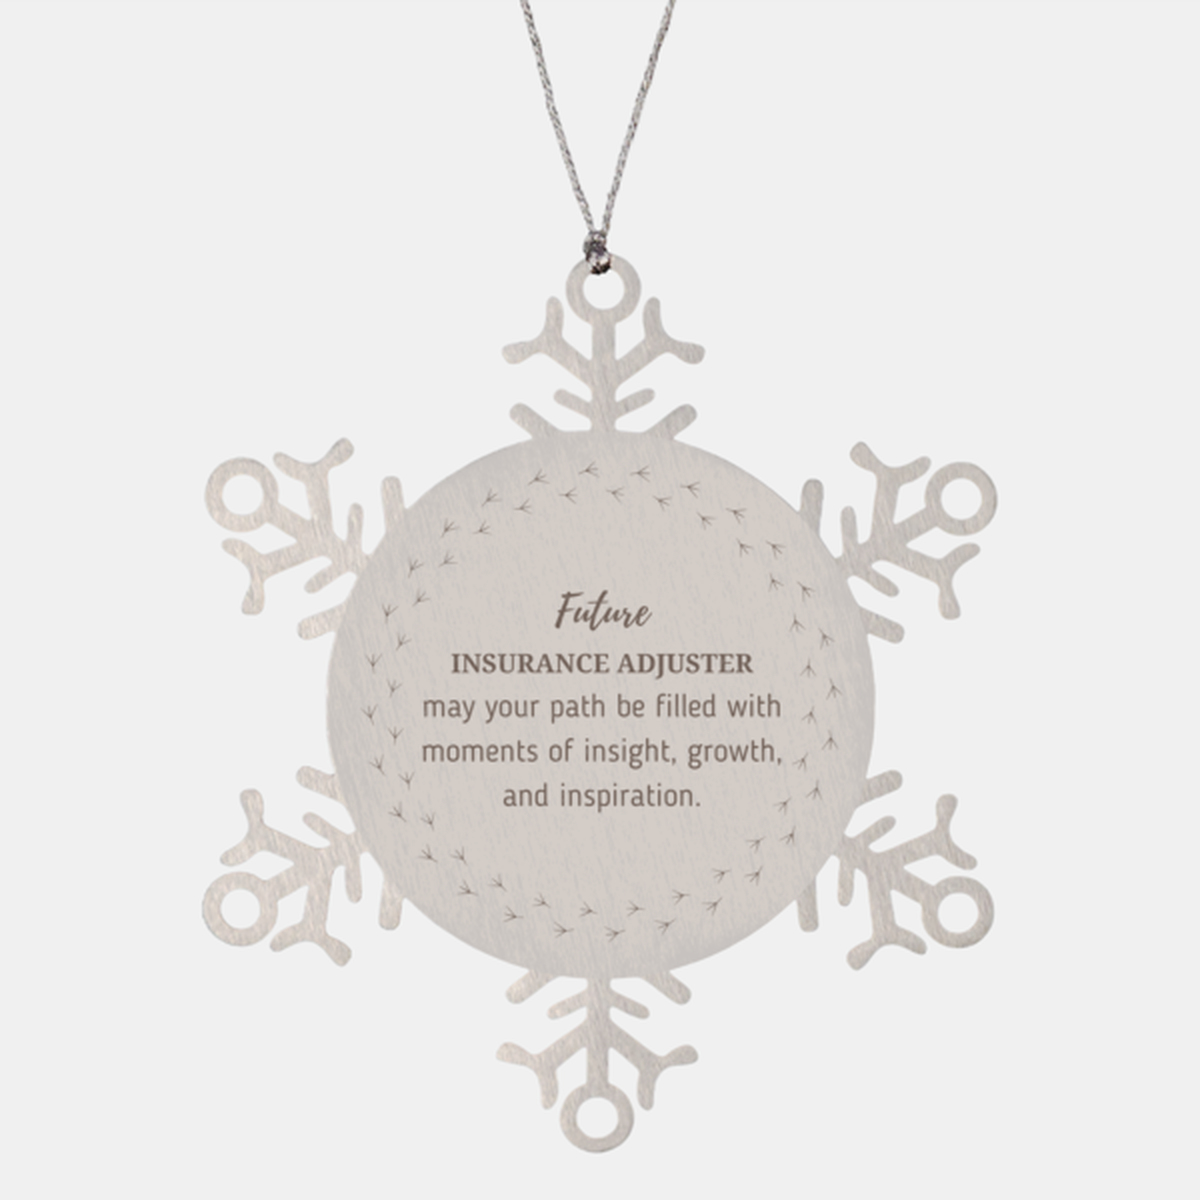 Future Insurance Adjuster Gifts, May your path be filled with moments of insight, Graduation Gifts for New Insurance Adjuster, Christmas Unique Snowflake Ornament For Men, Women, Friends